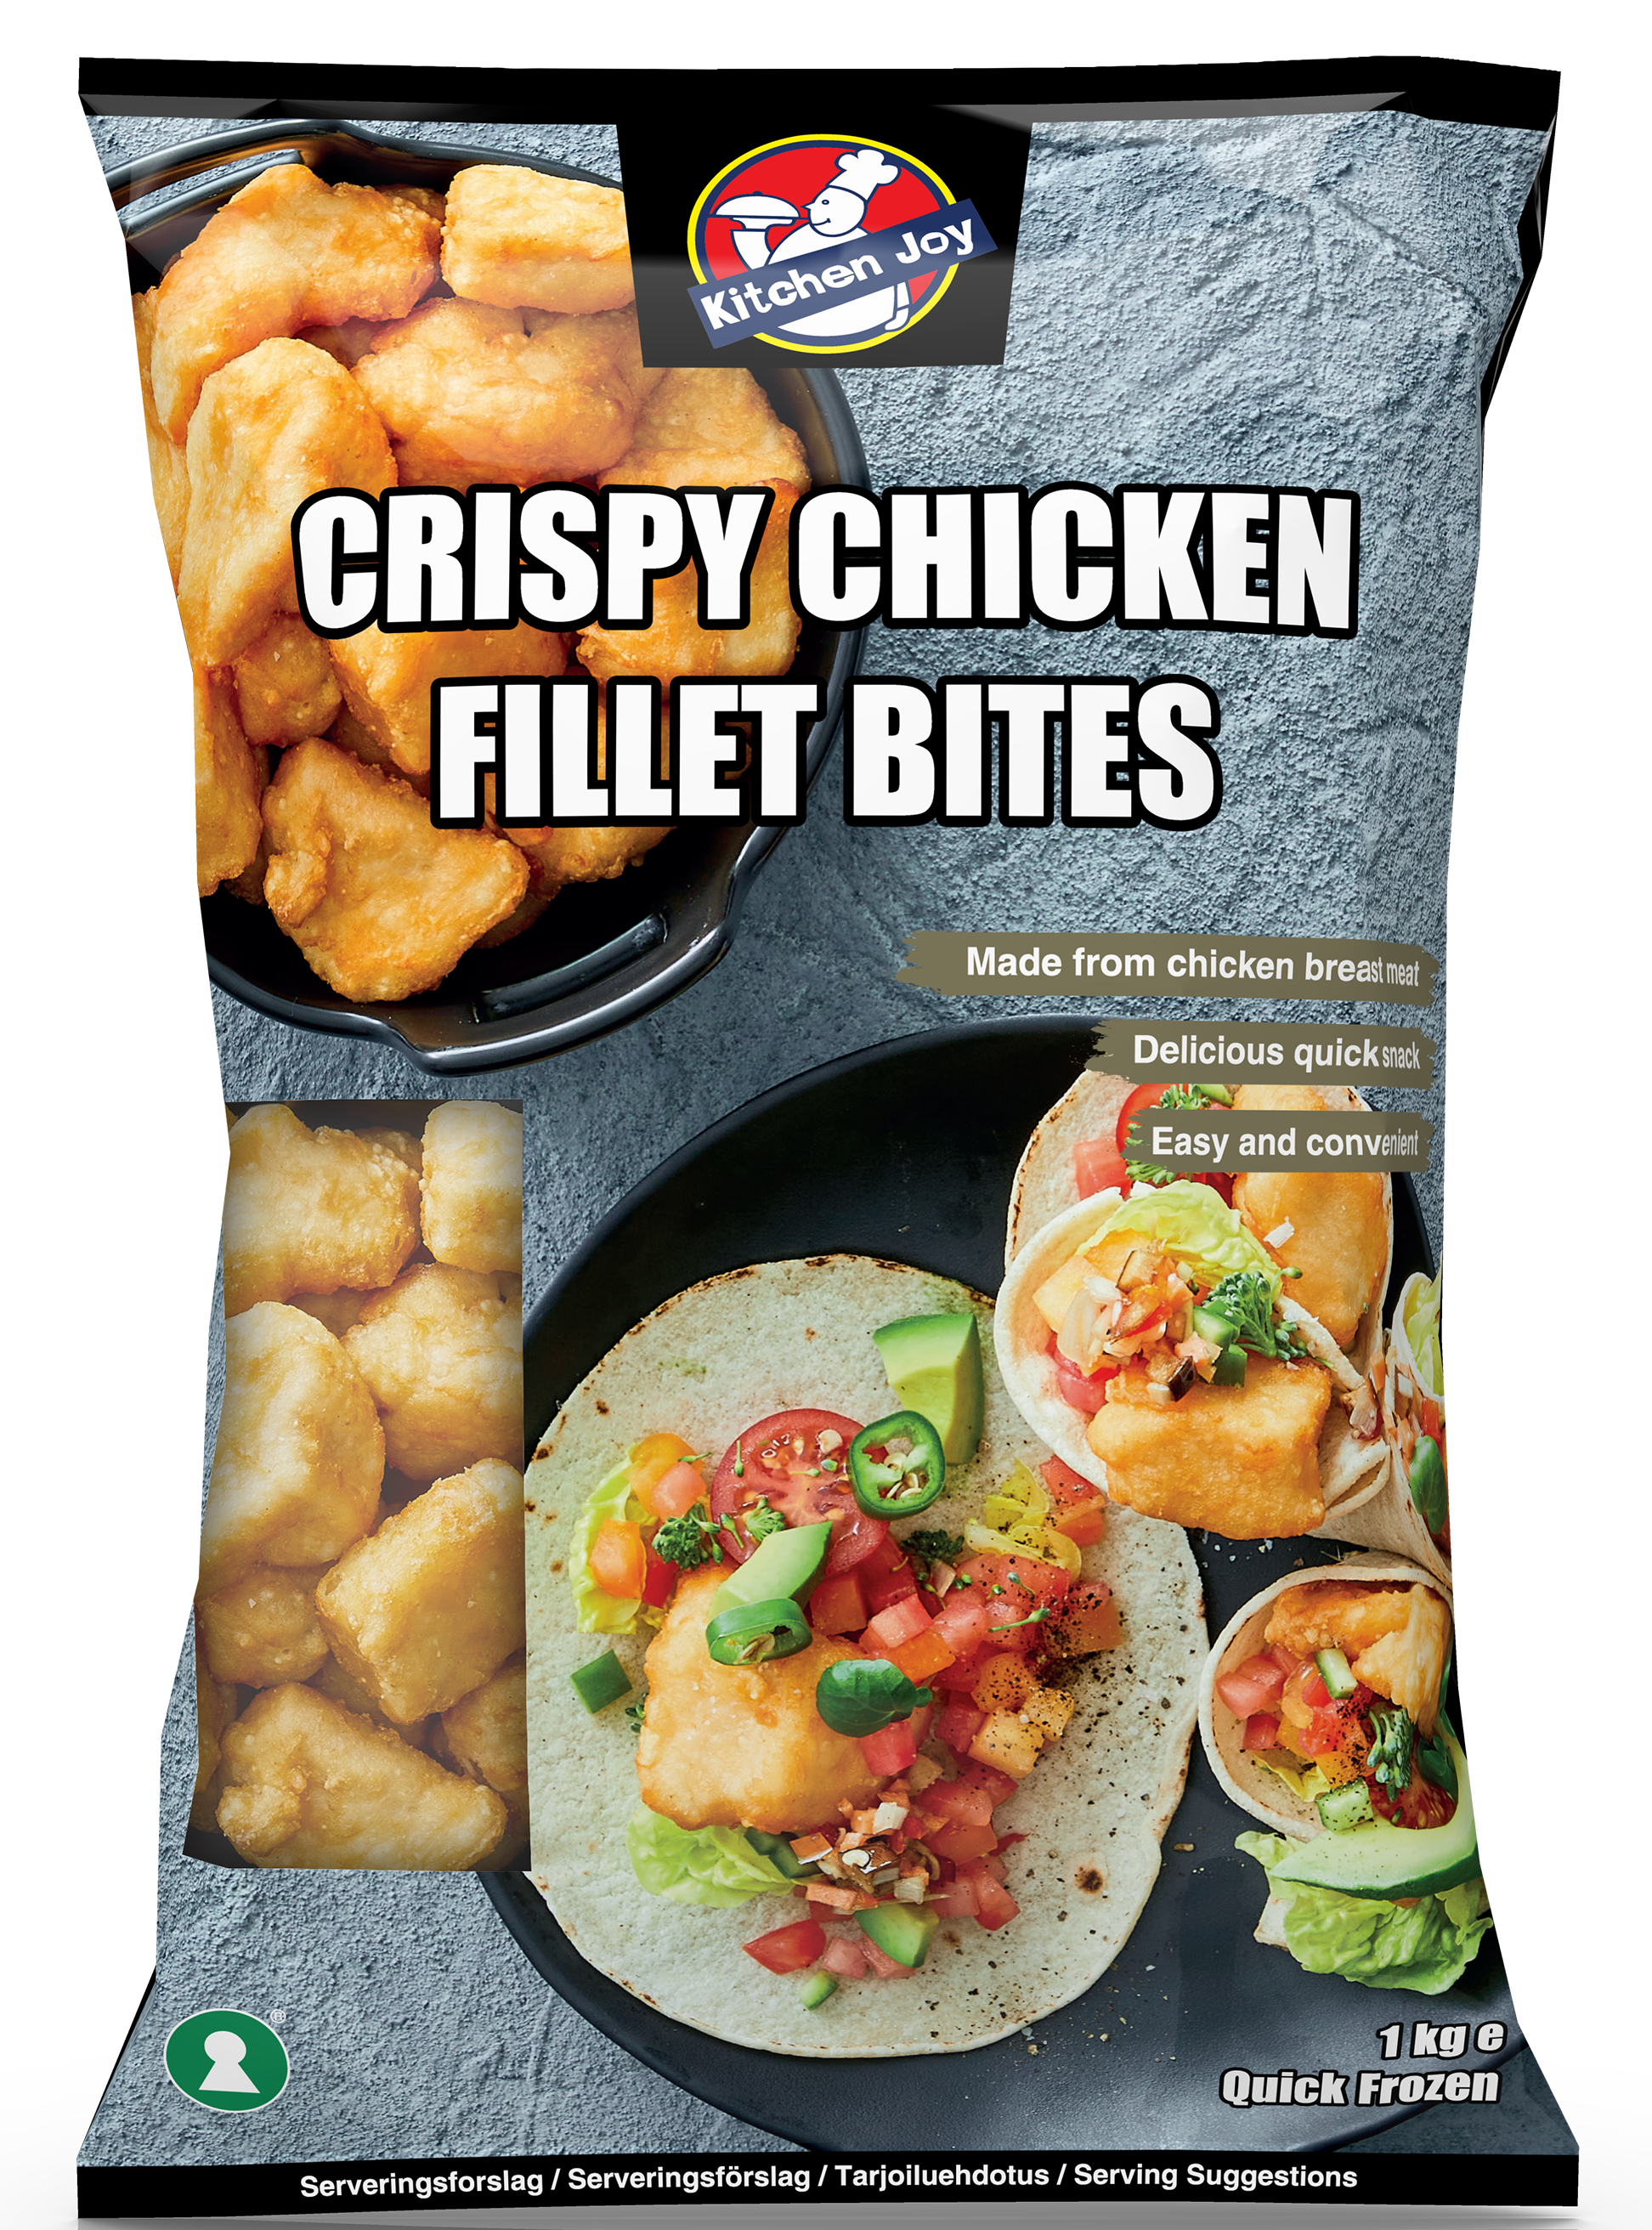 https://www.cpknowwhatyoueat.com/storage/contents/products/1677749391_crispy-chicken-fillet-bites.png